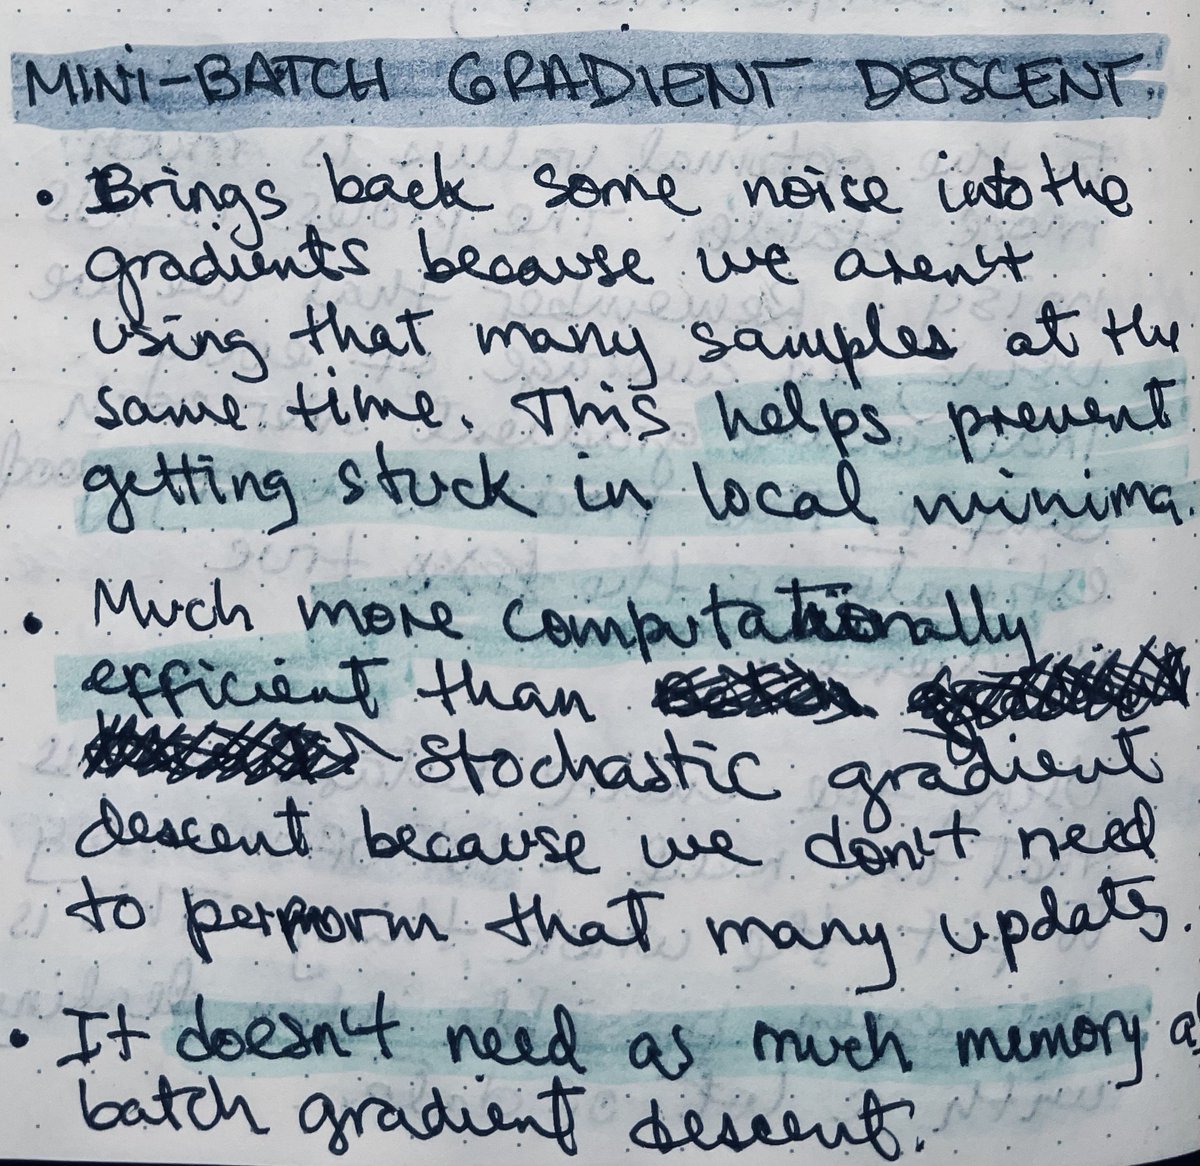 Using some of the data (more than one sample but fewer than the entire dataset) is called "Mini-Batch Gradient Descent."The algorithm works like Batch Gradient Descent, with the only difference that we use fewer samples.11/